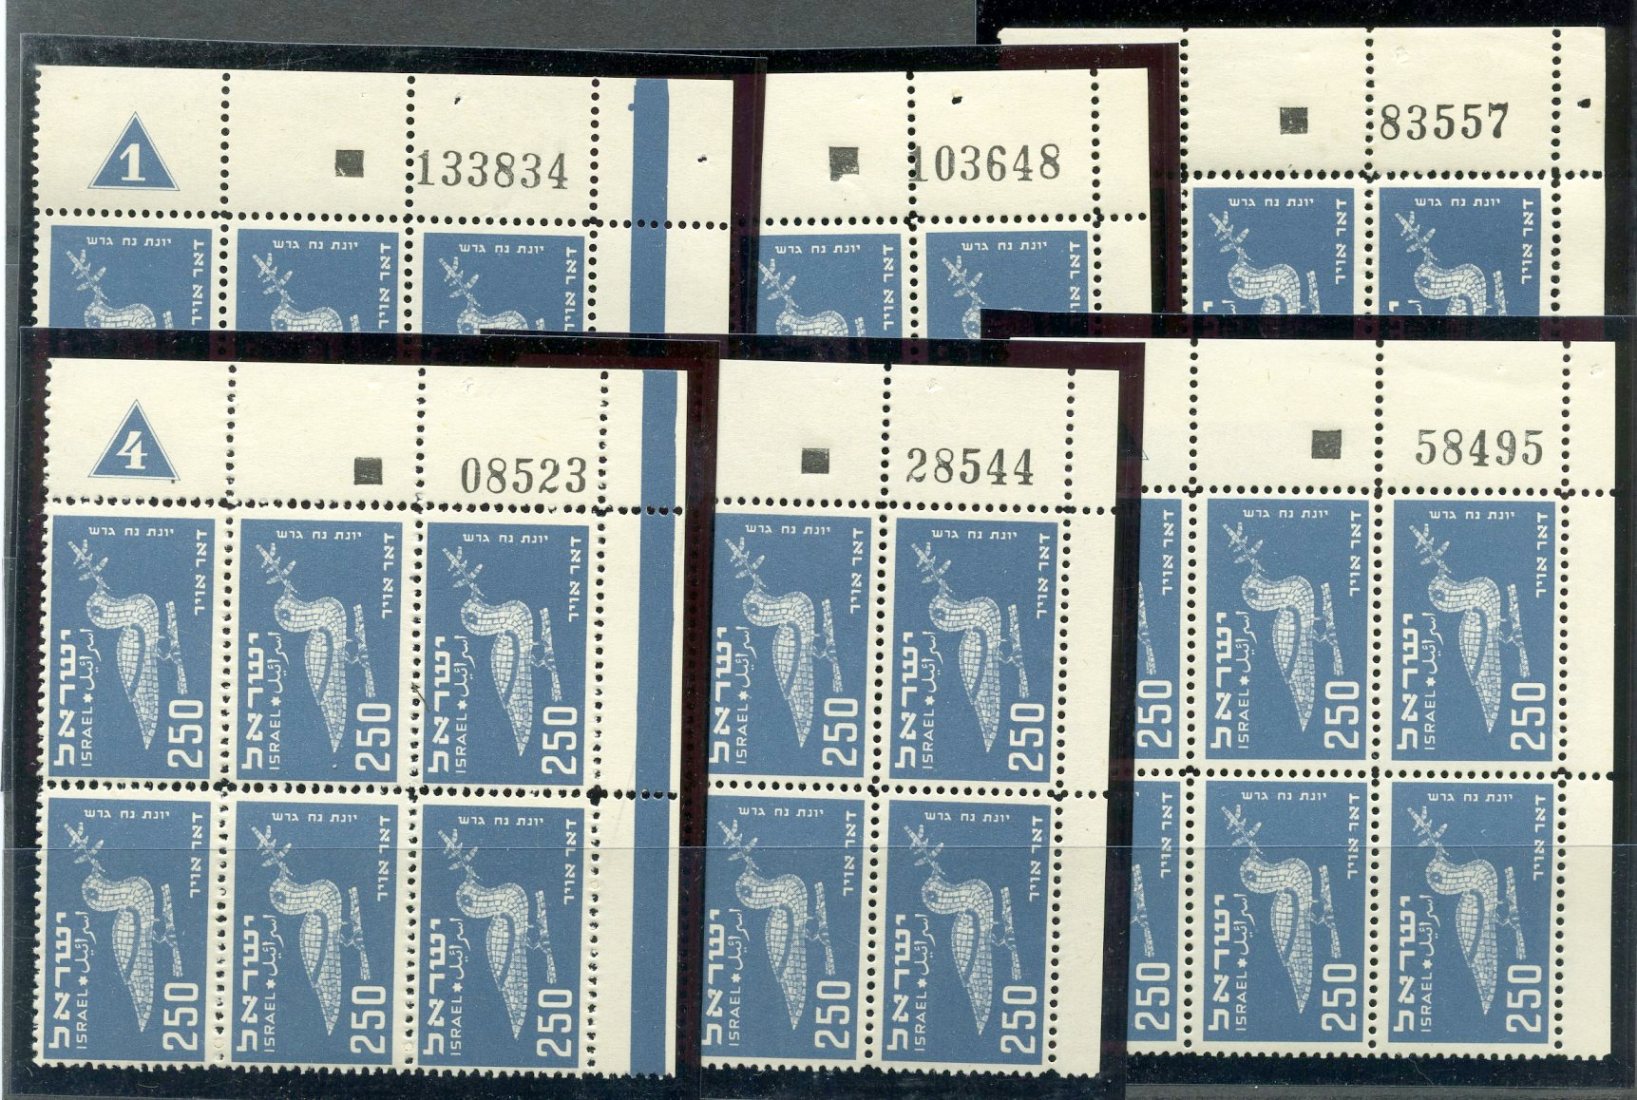 Lot 325 - ISRAEL: ISSUES, FDC's, PLATE BLOCKS & BOOKLETS  -  Tel Aviv Stamps Ltd. Auction #50